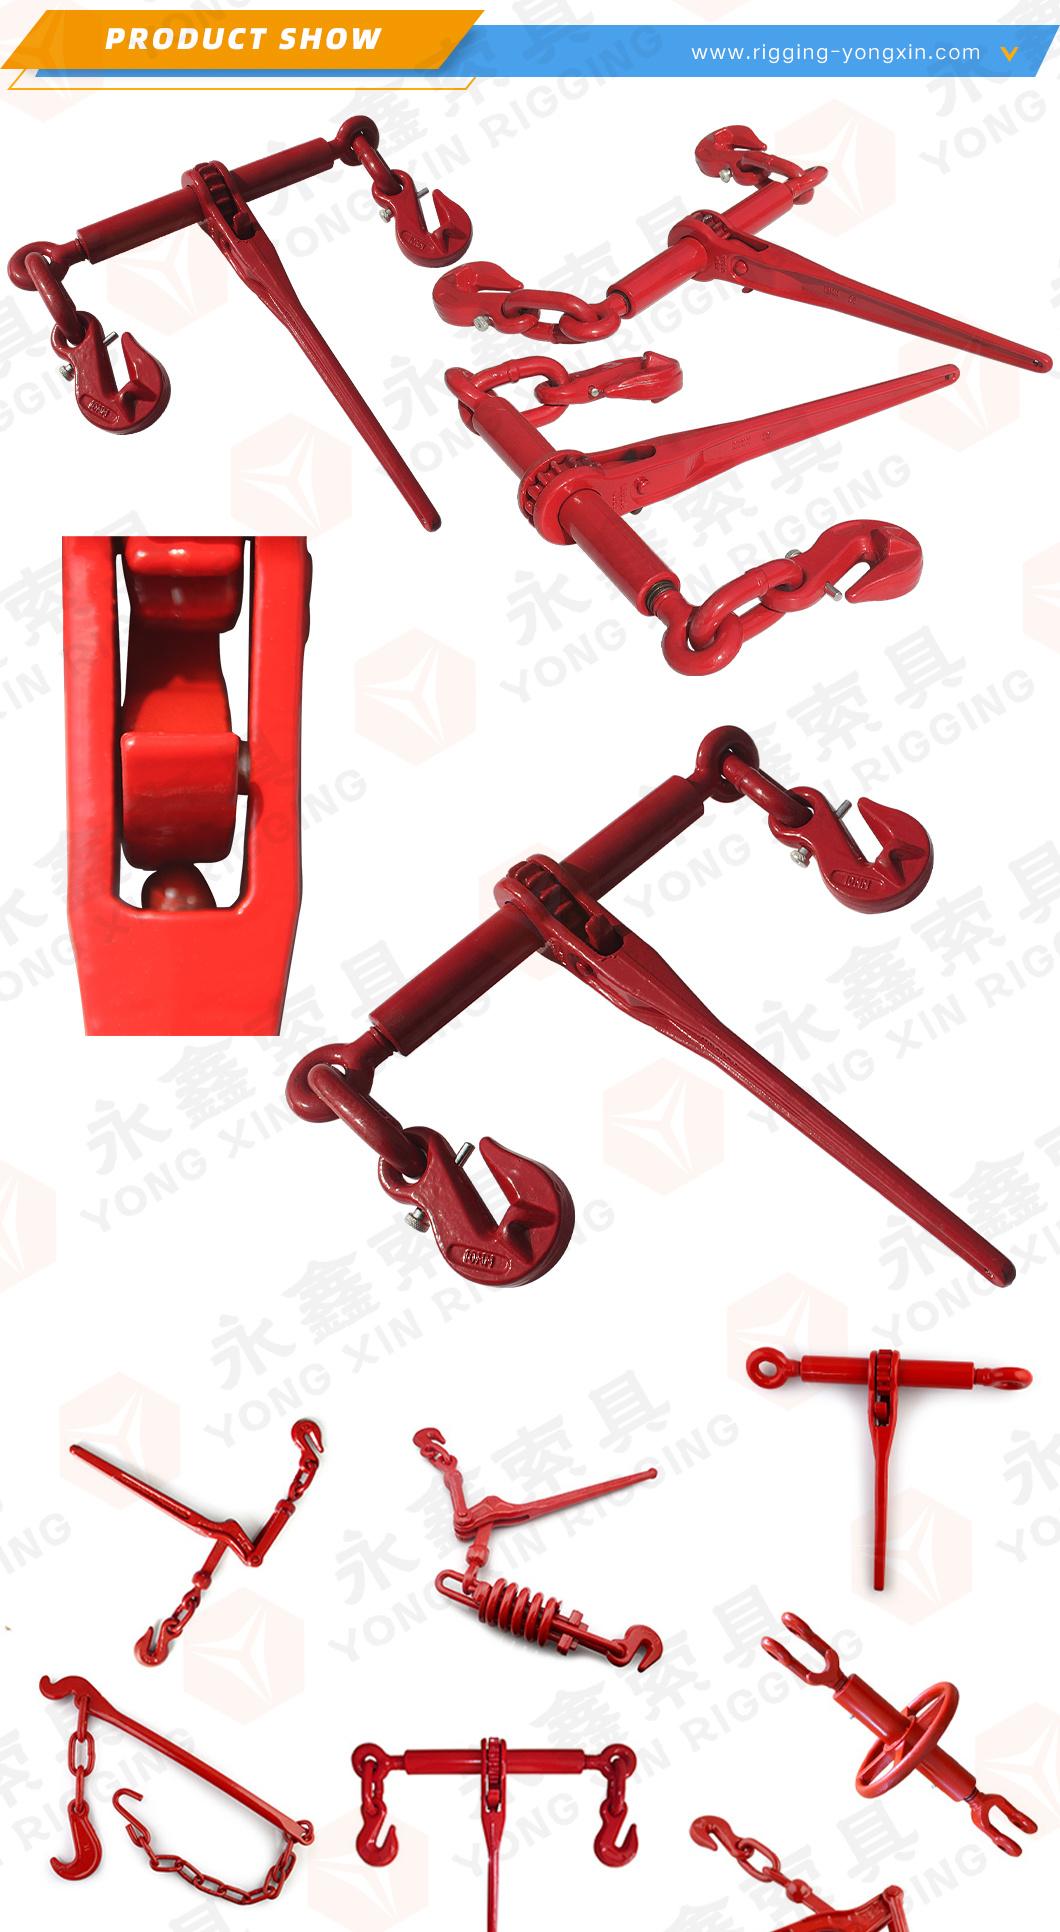 6mm Standard European Ratchet Type Load Binder with Wings Safety Pin Hook